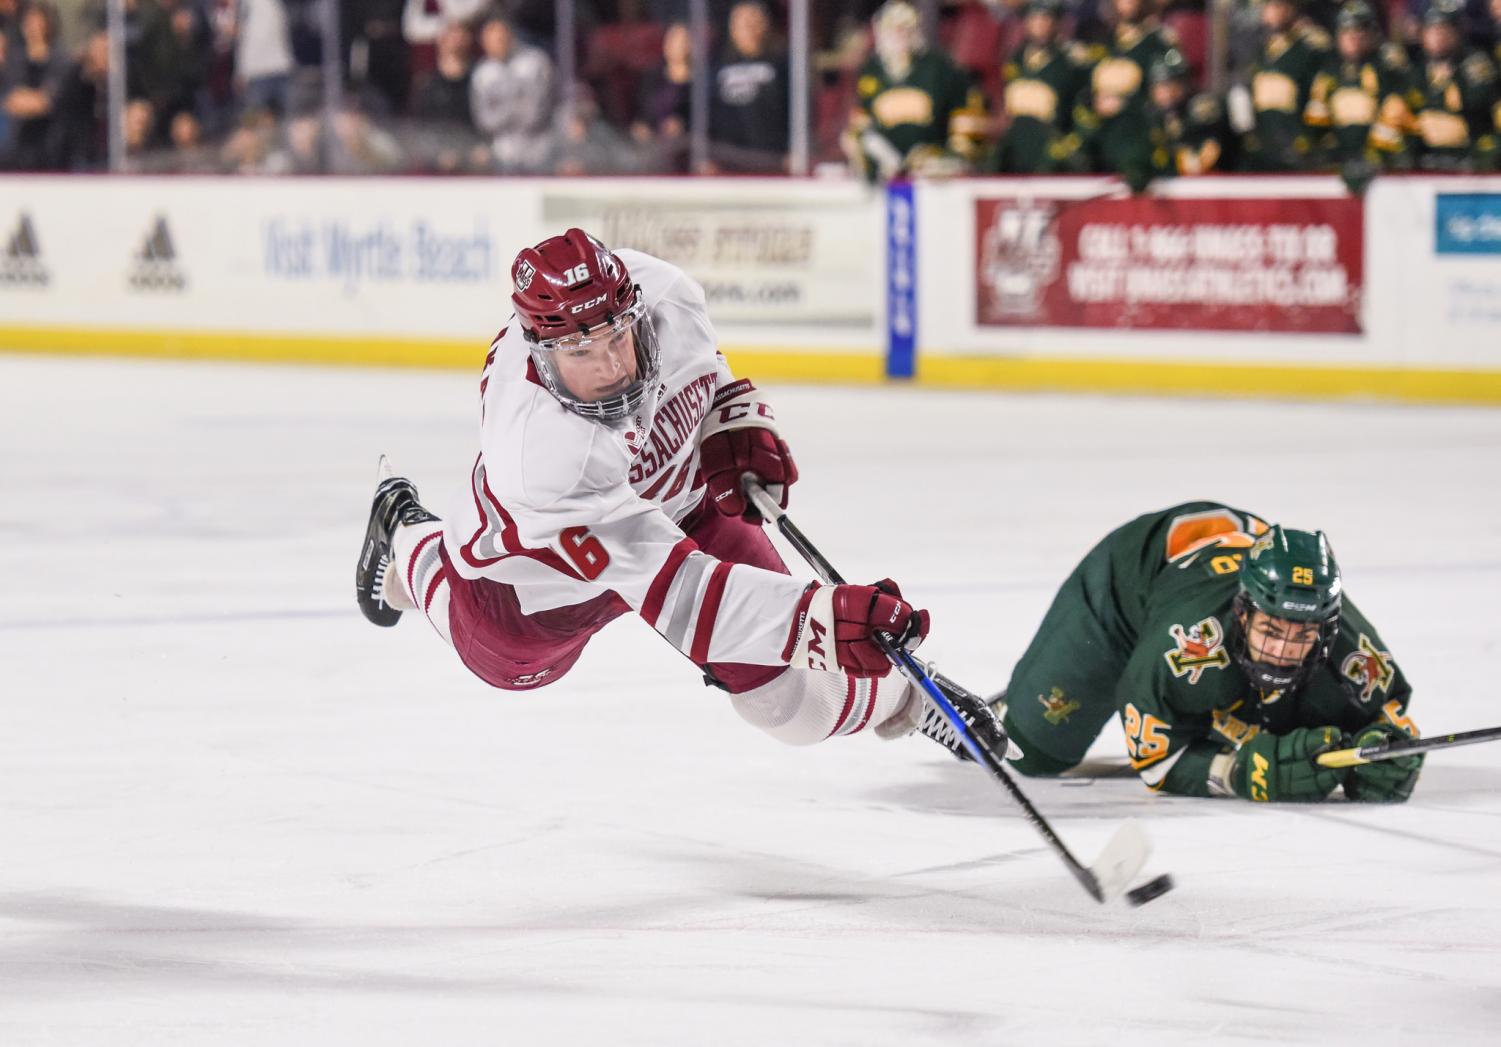 Cale Makar opens up about decision to return to UMass ...